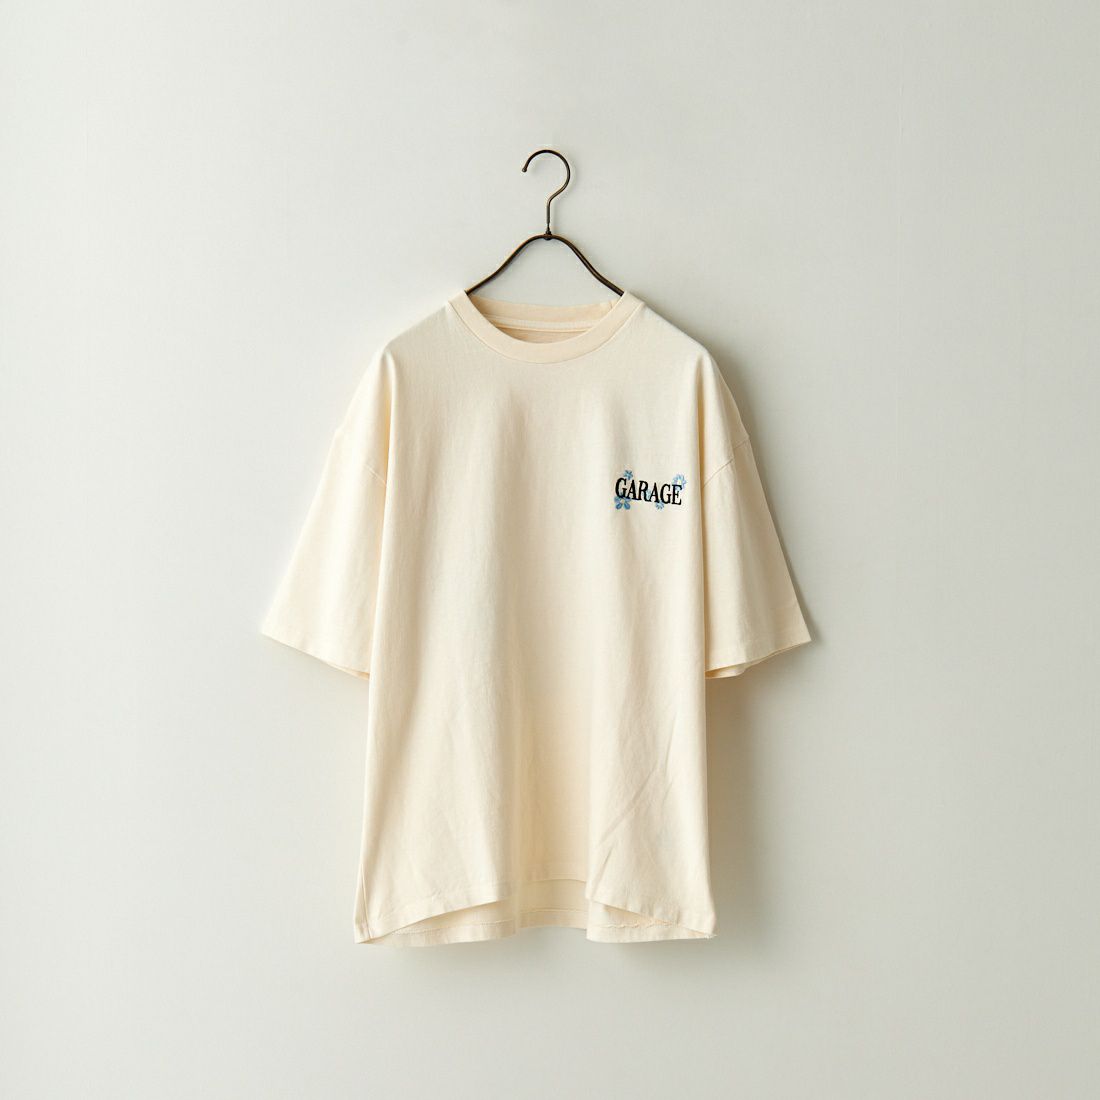 Jeans Factory Clothes [ジーンズファクトリークローズ] DISCOプリントTシャツ [2322-420IN-B] OFF WHITE